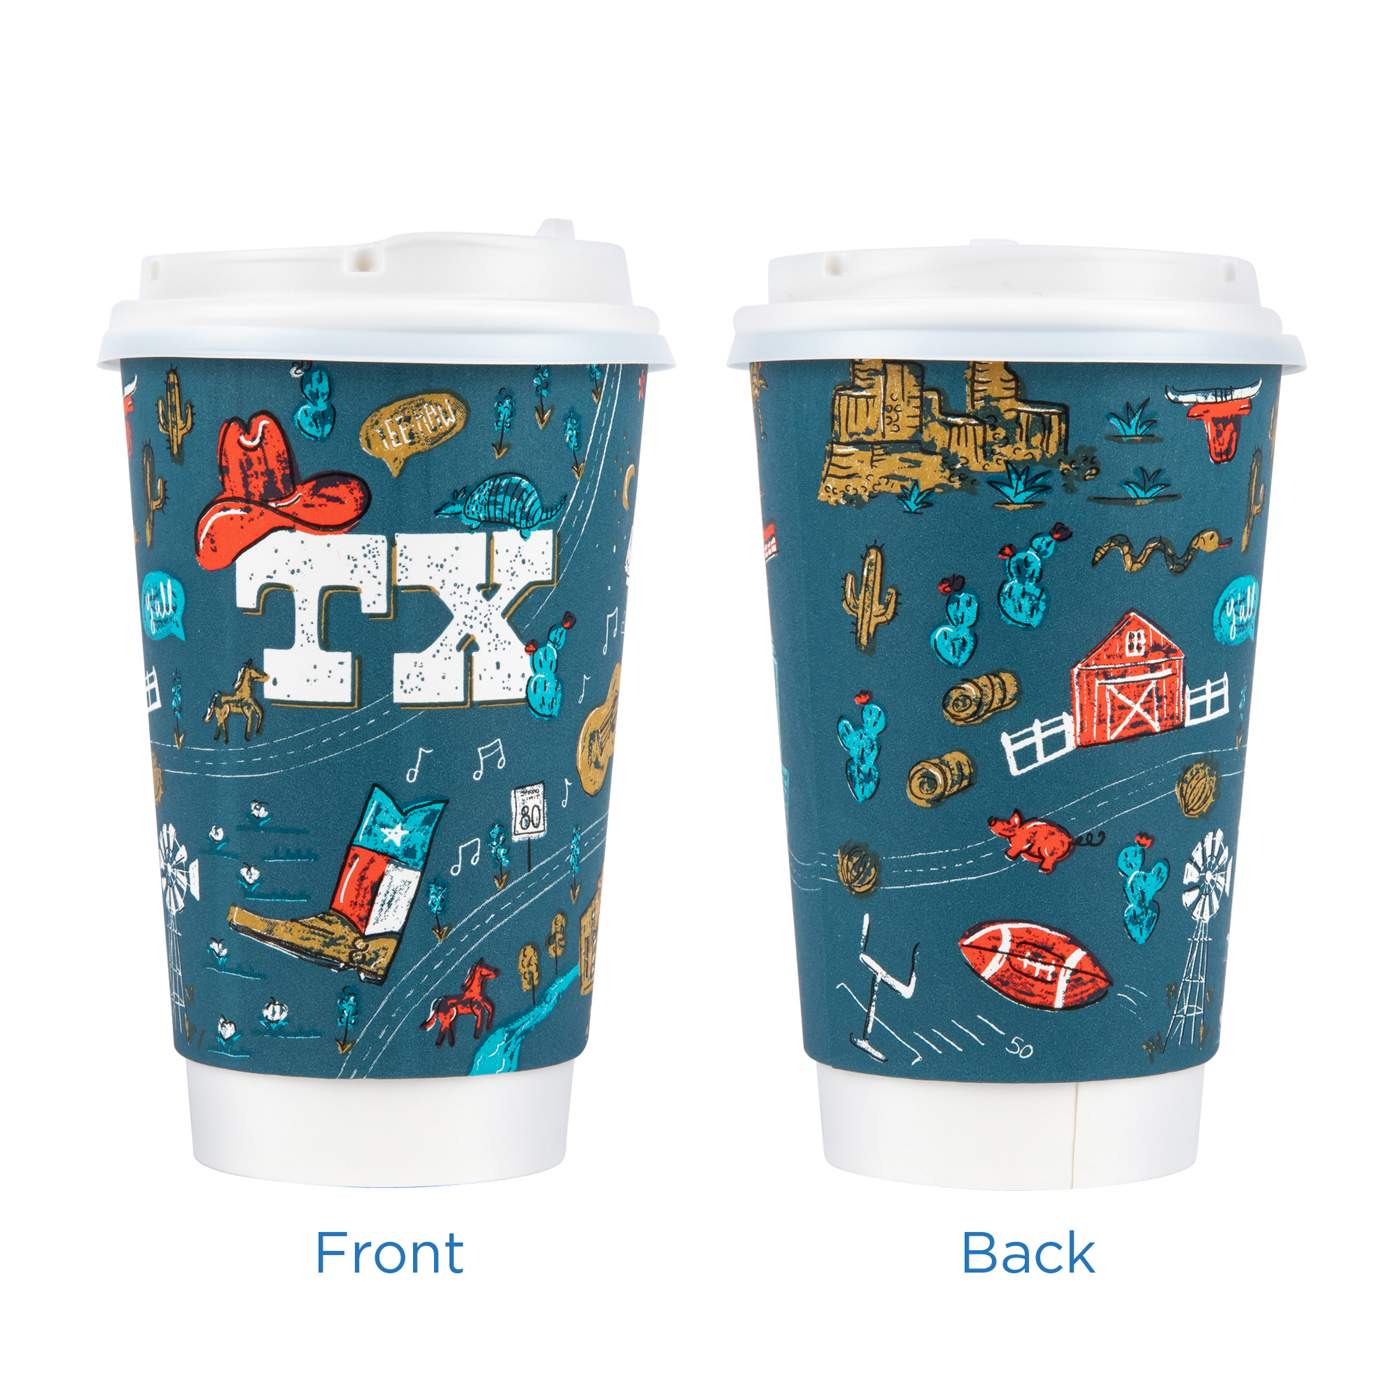 H-E-B 2 oz Clear Plastic To Go Cups with Lids - Shop Drinkware at H-E-B